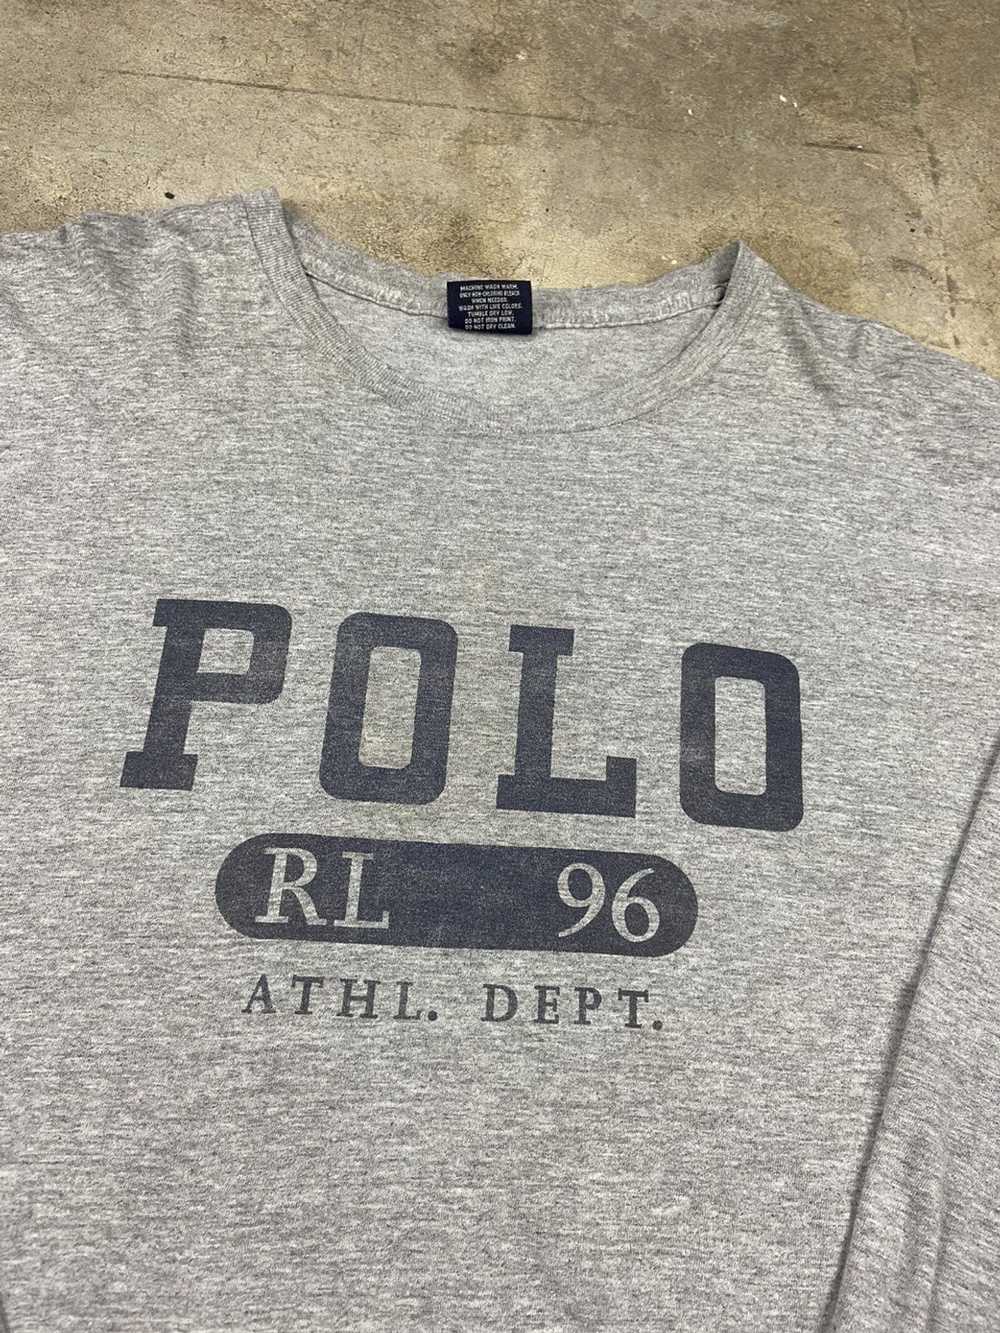 Made In Usa × Polo Ralph Lauren × Vintage Vintage… - image 3